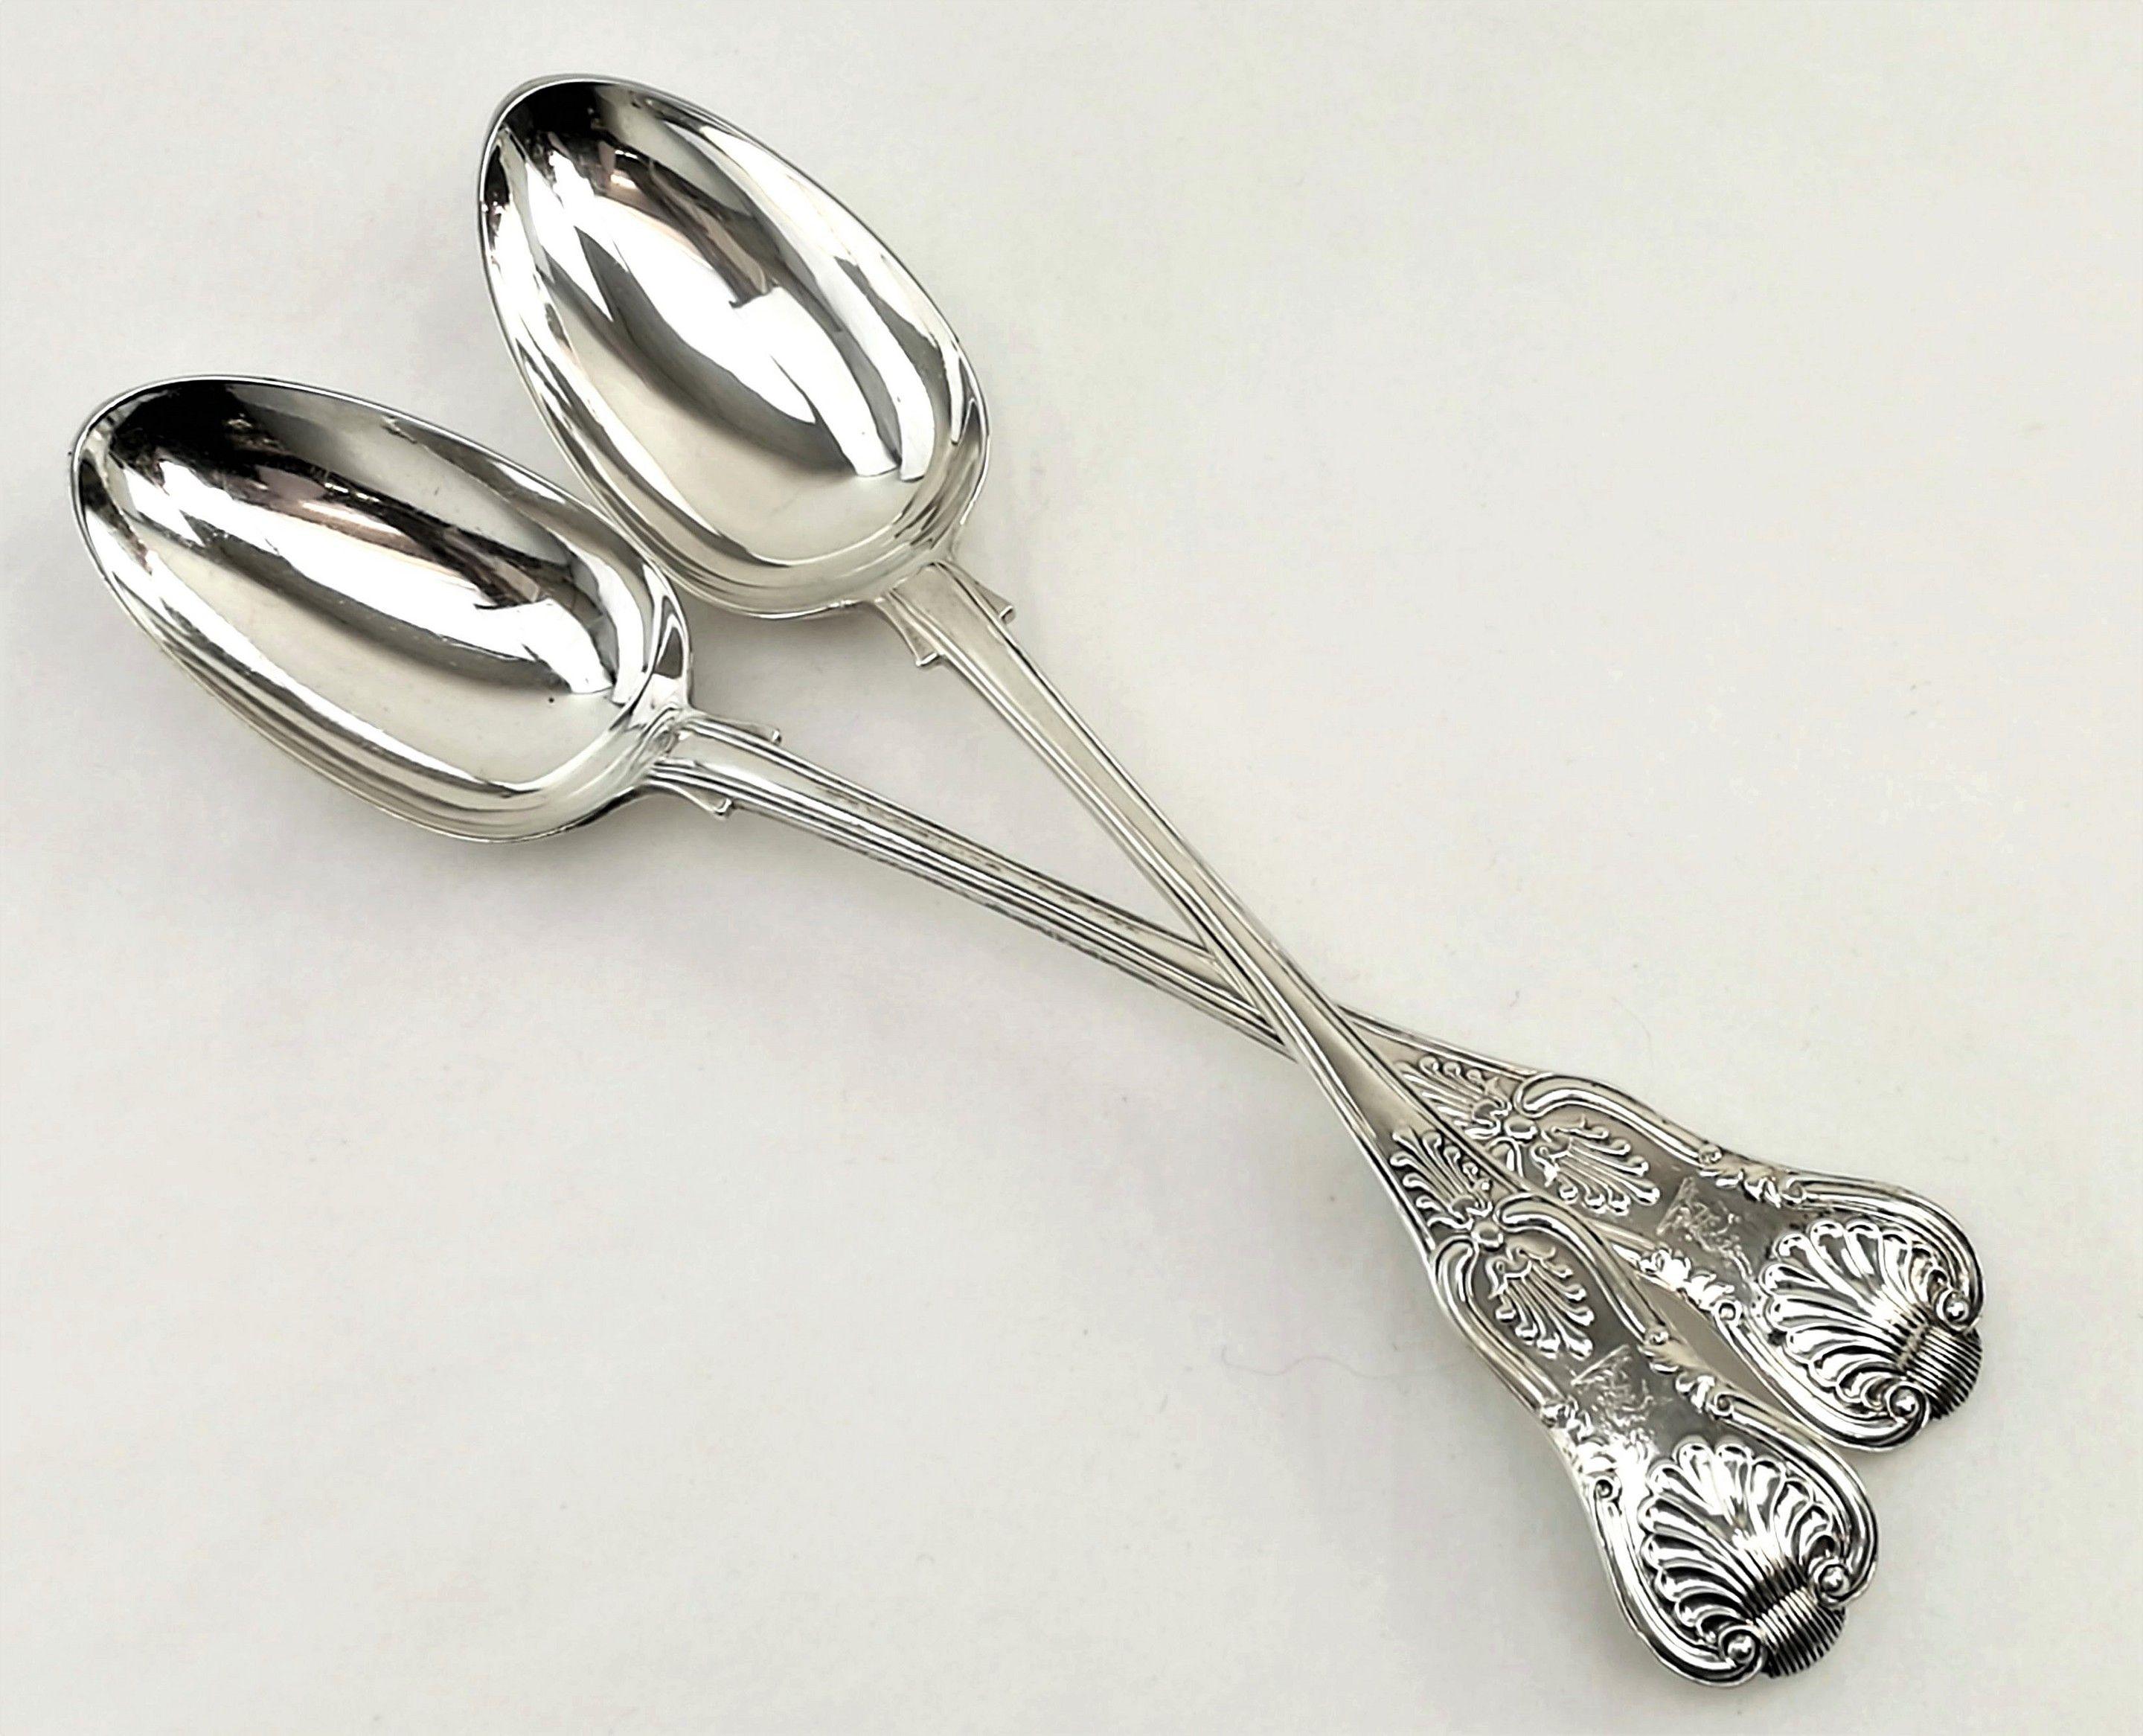 A pair of antique Victorian sterling silver serving spoons / basting spoons in a Classic Kings pattern. These double struck spoons are of a heavy weight and excellent quality. Each has a tiny crest engraved on the handle.
 
 Date: 1838.
 Made in